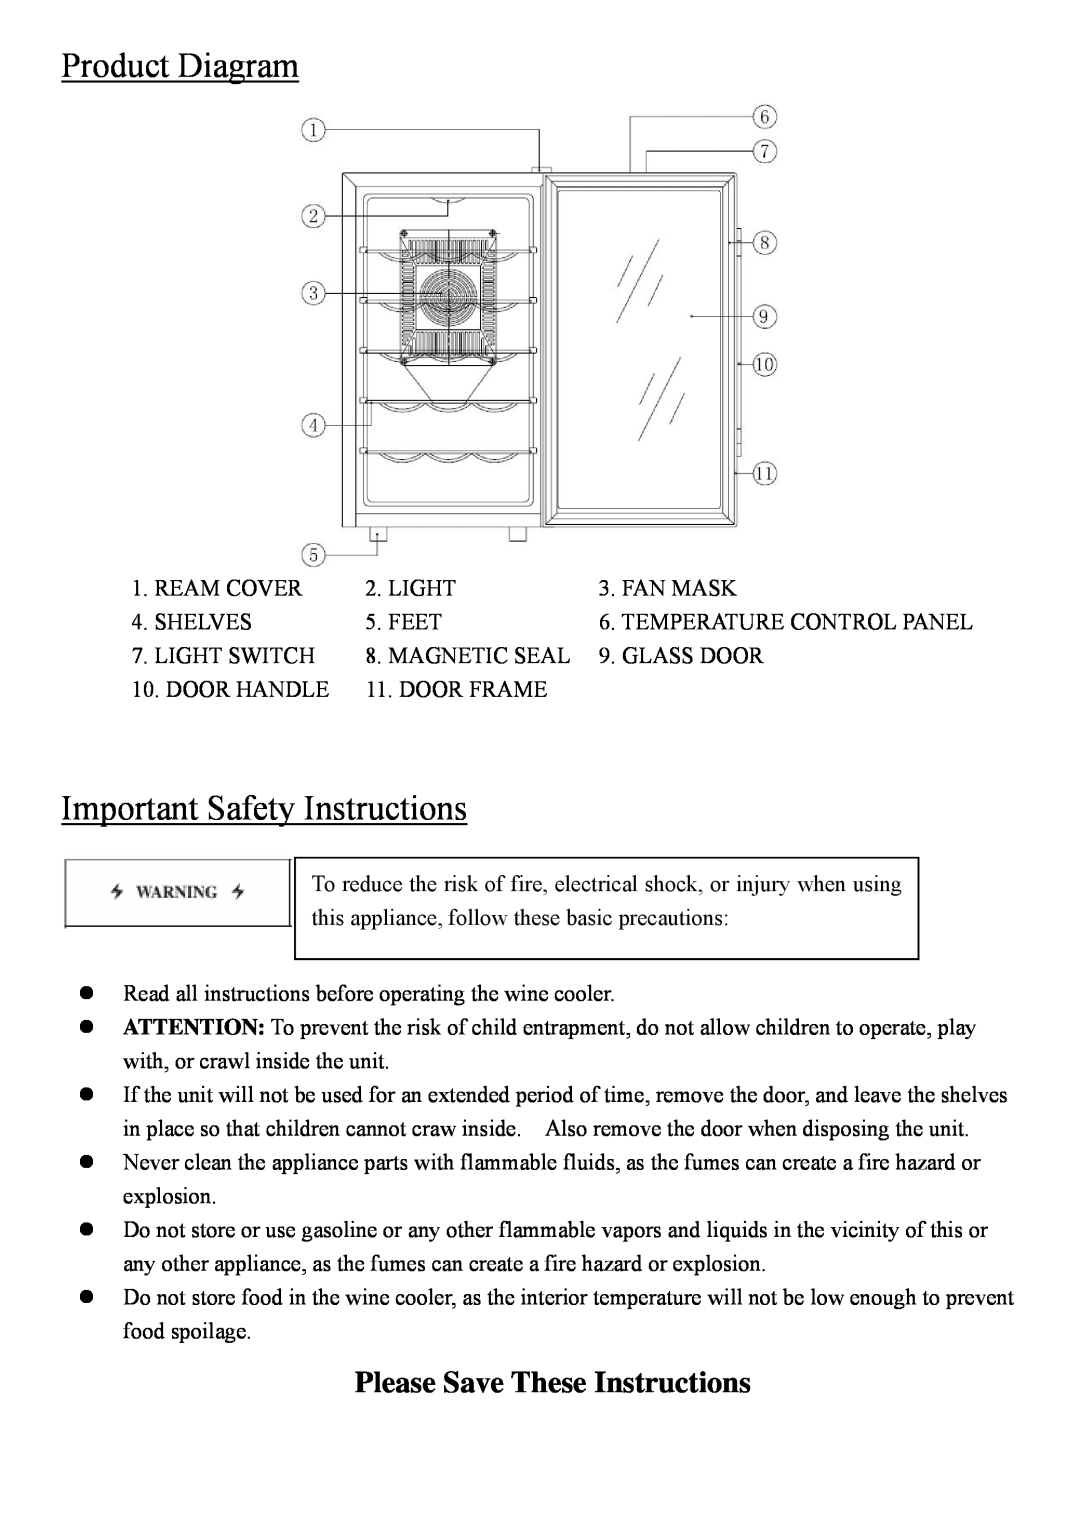 NewAir AW-180E instruction manual Product Diagram, Important Safety Instructions, Please Save These Instructions 